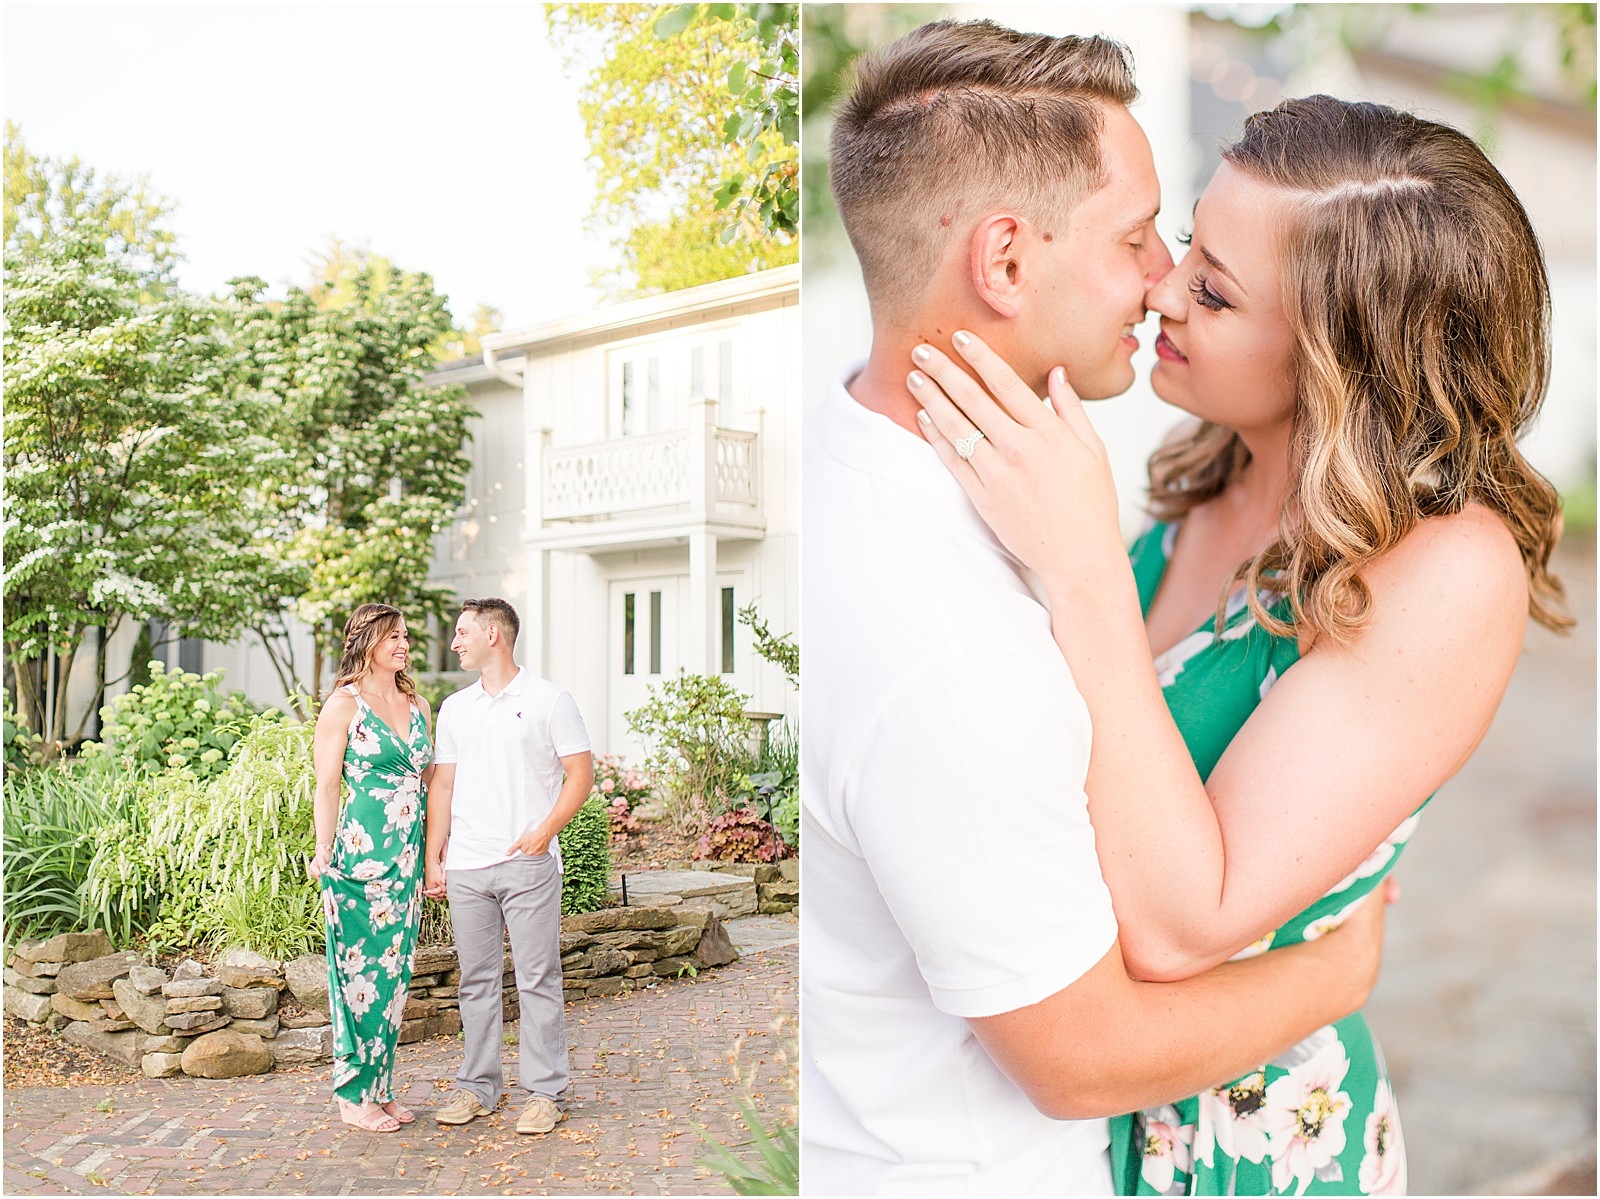 20 West Downtown Newburgh Anniversary Session | Katie and Bobby | Bret and Brandie Photography 020.jpg